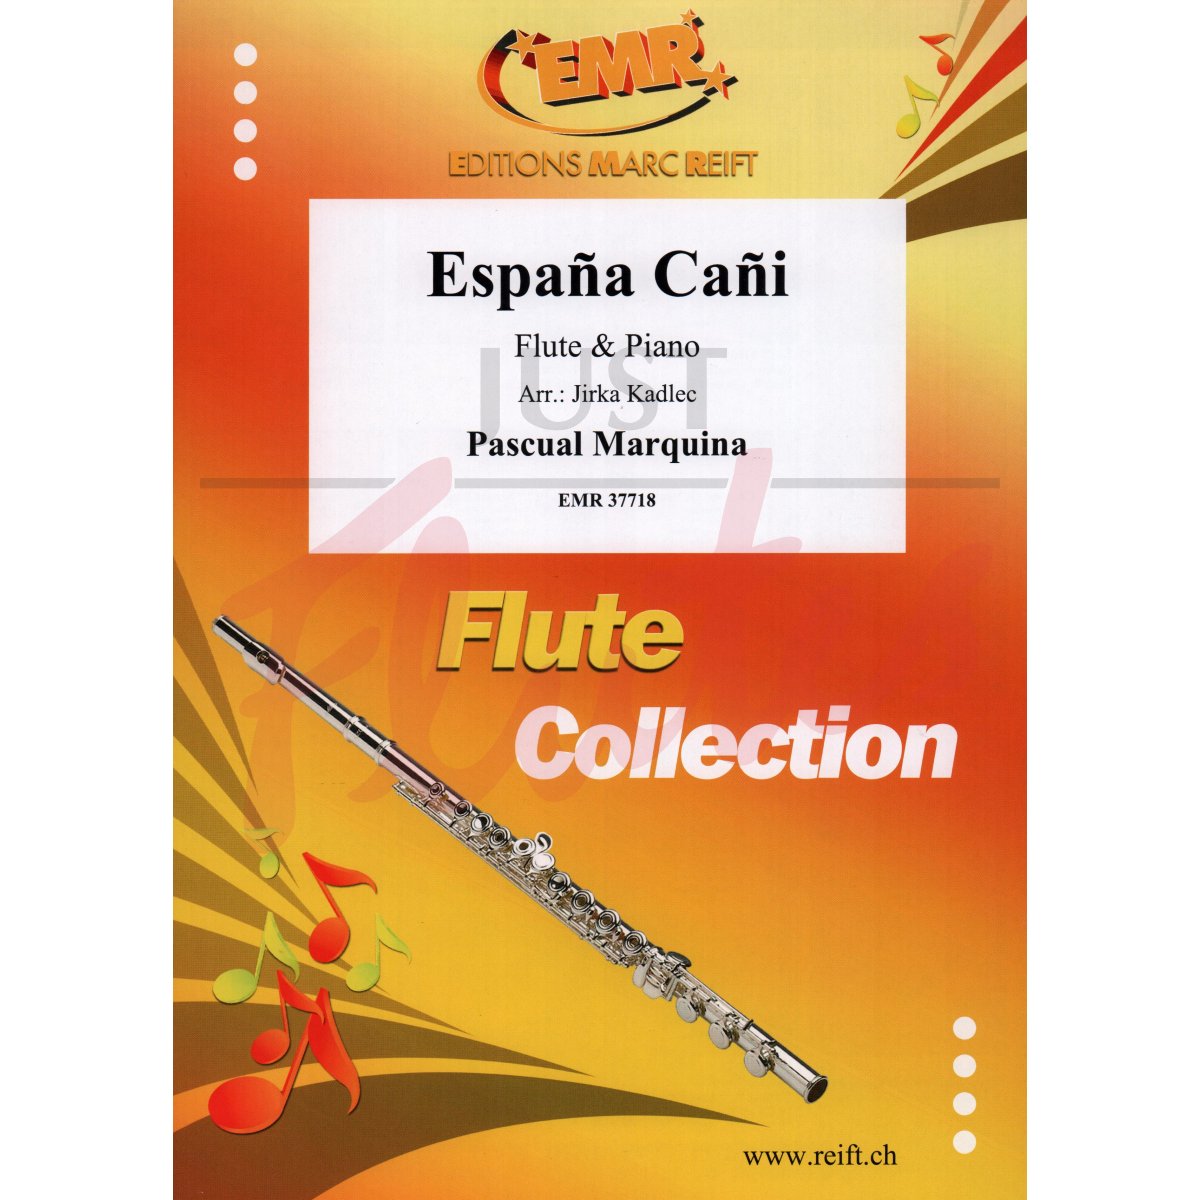 Spanish Gipsy Dance (España Cañi) for Flute and Piano